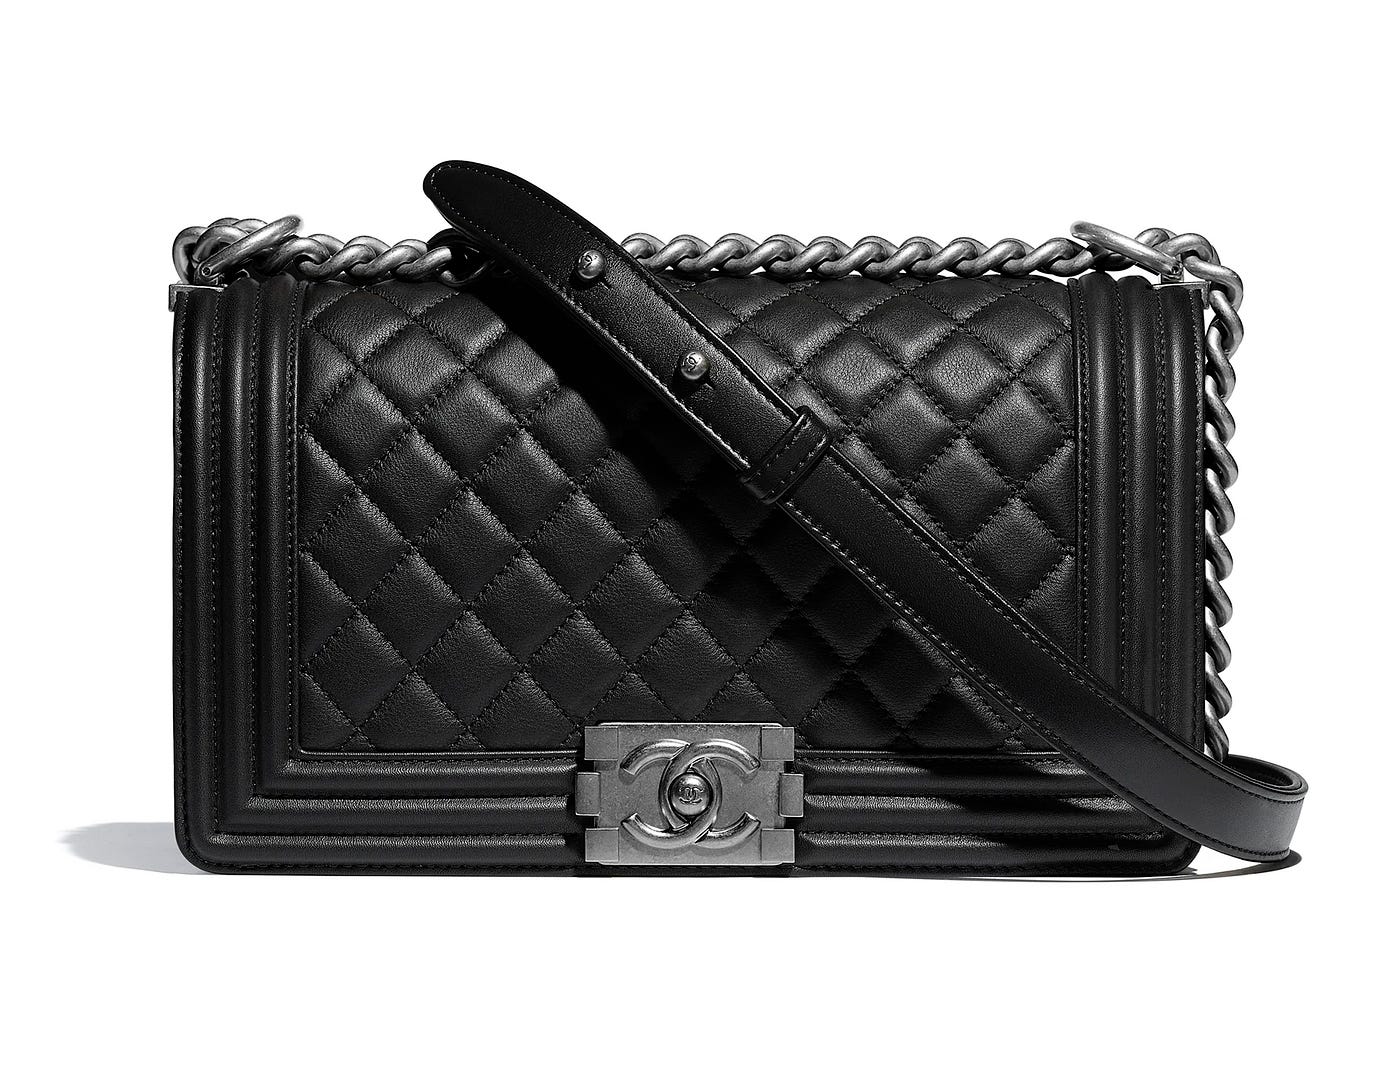 The Ultimate Chanel Bag Guide. Chanel, the iconic French fashion